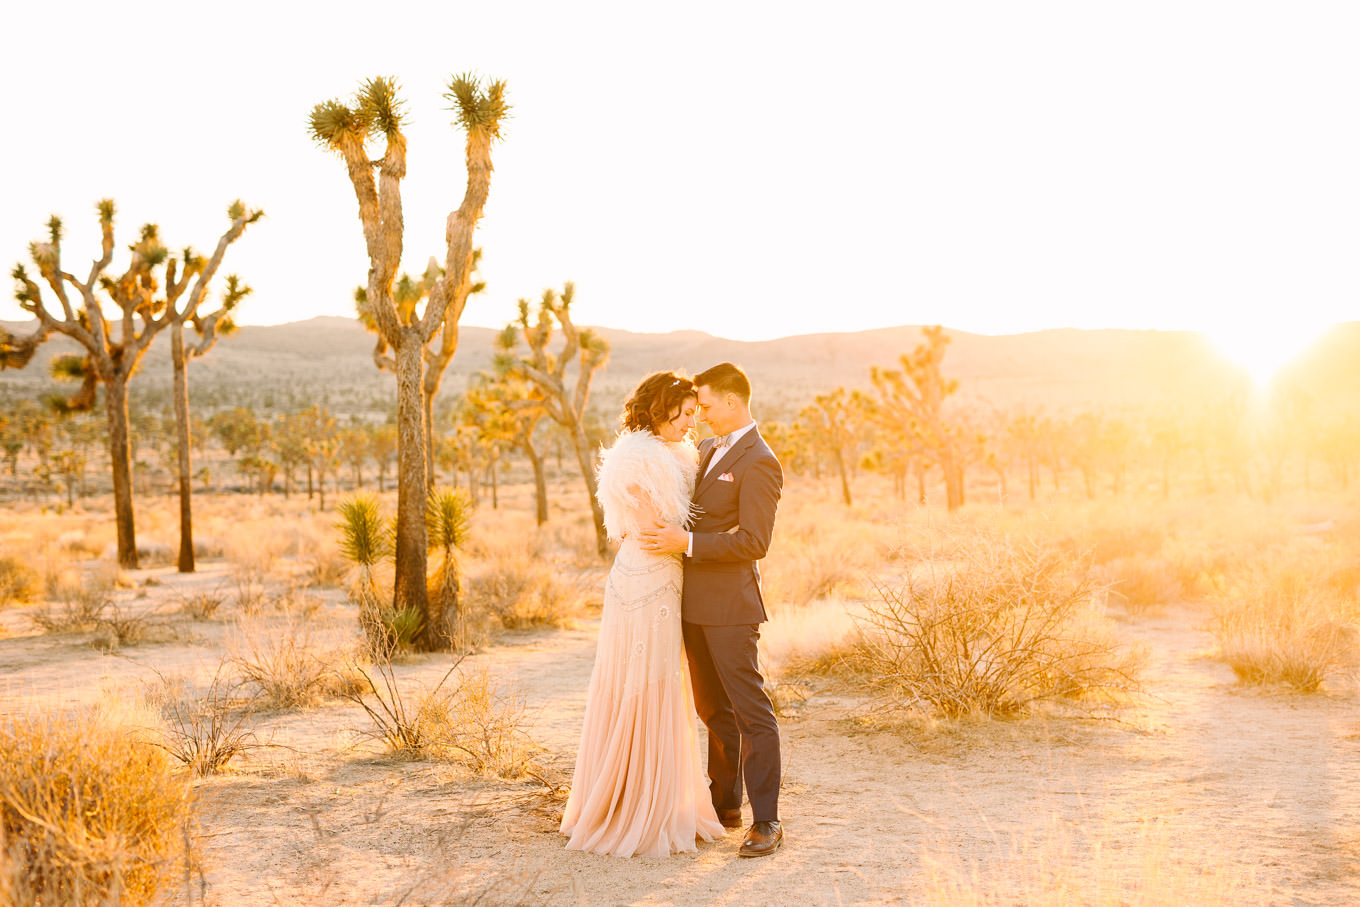 Joshua Tree elopement | Wedding and elopement photography roundup | Los Angeles and Palm Springs photographer | #losangeleswedding #palmspringswedding #elopementphotographer Source: Mary Costa Photography | Los Angeles